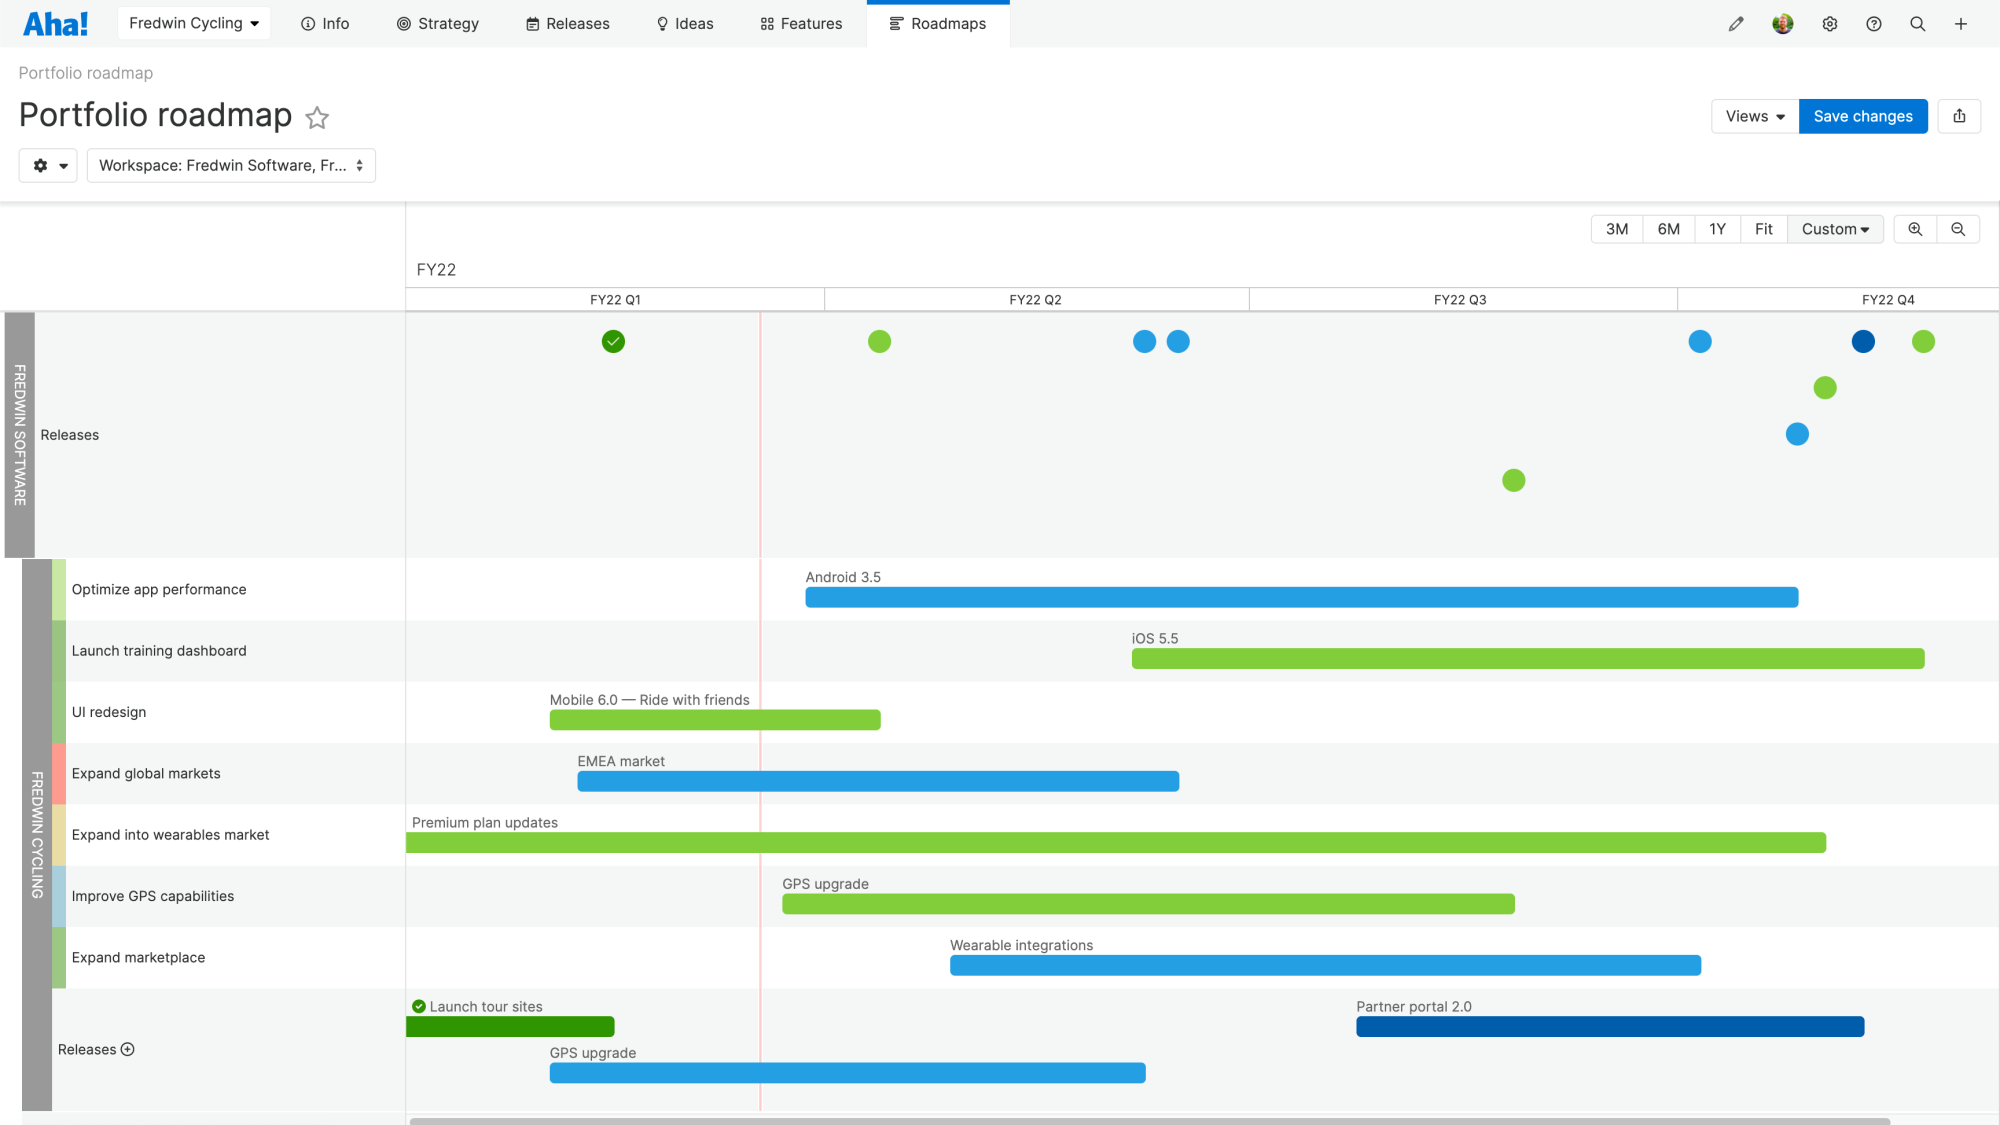 A portfolio roadmap with multiple products and releases